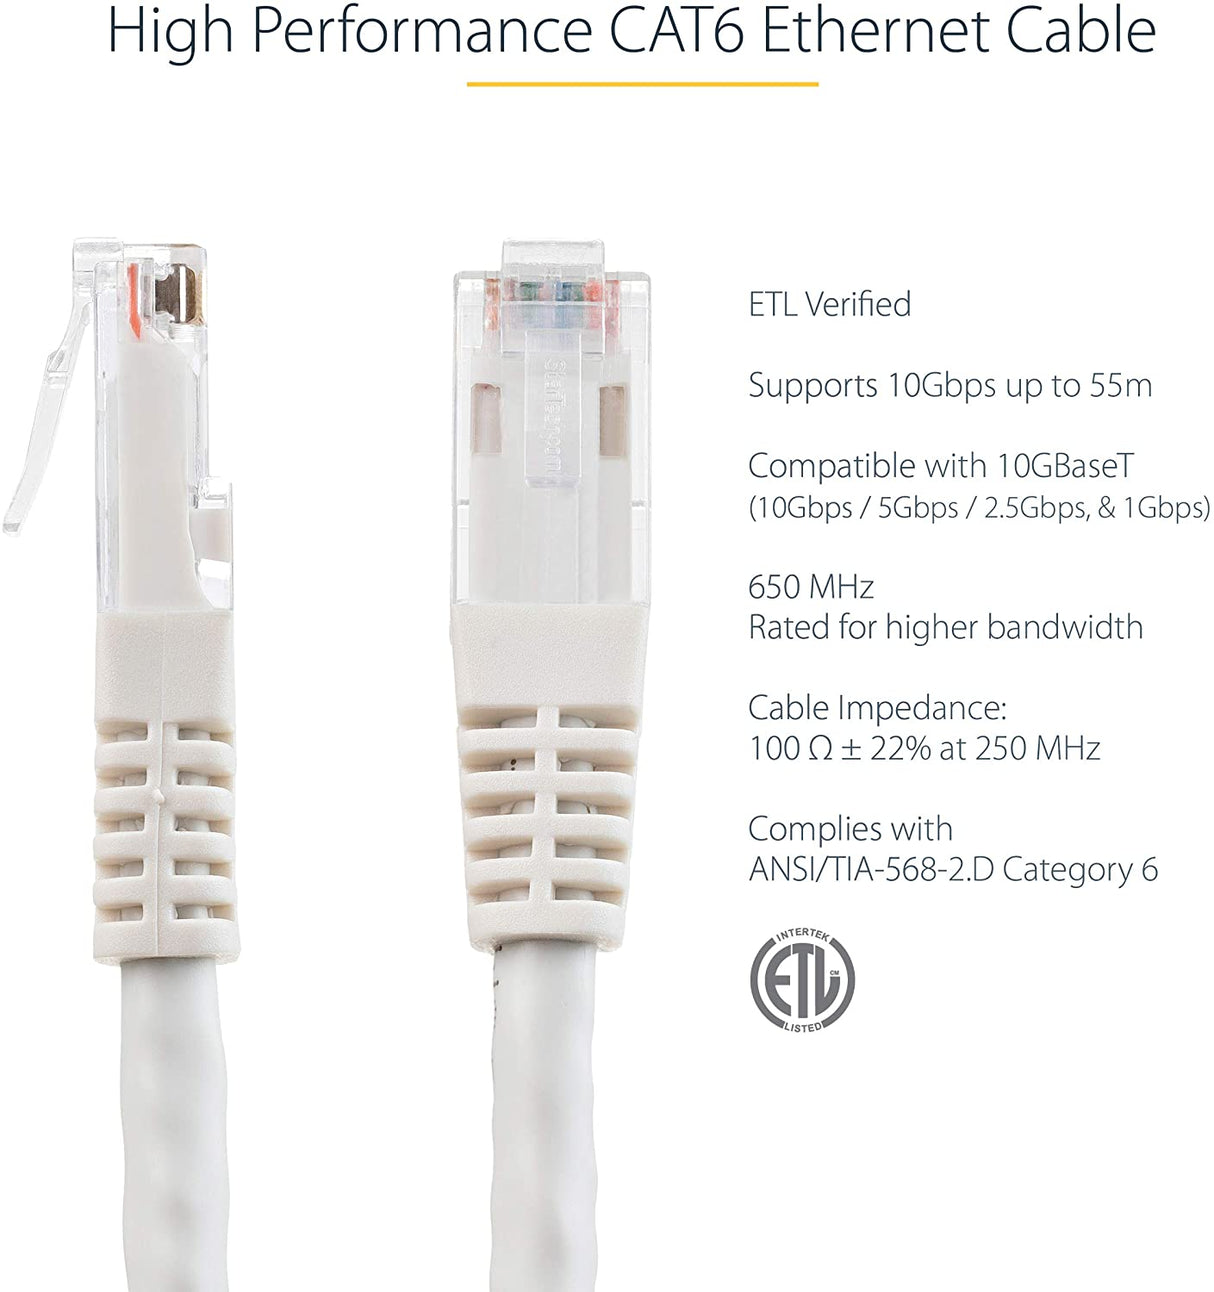 StarTech.com 100ft CAT6 Ethernet Cable - White CAT 6 Gigabit Ethernet Wire -650MHz 100W PoE++ RJ45 UTP Molded Category 6 Network/Patch Cord w/Strain Relief/Fluke Tested UL/TIA Certified (C6PATCH100WH) White 100 ft / 30 m 1 Pack